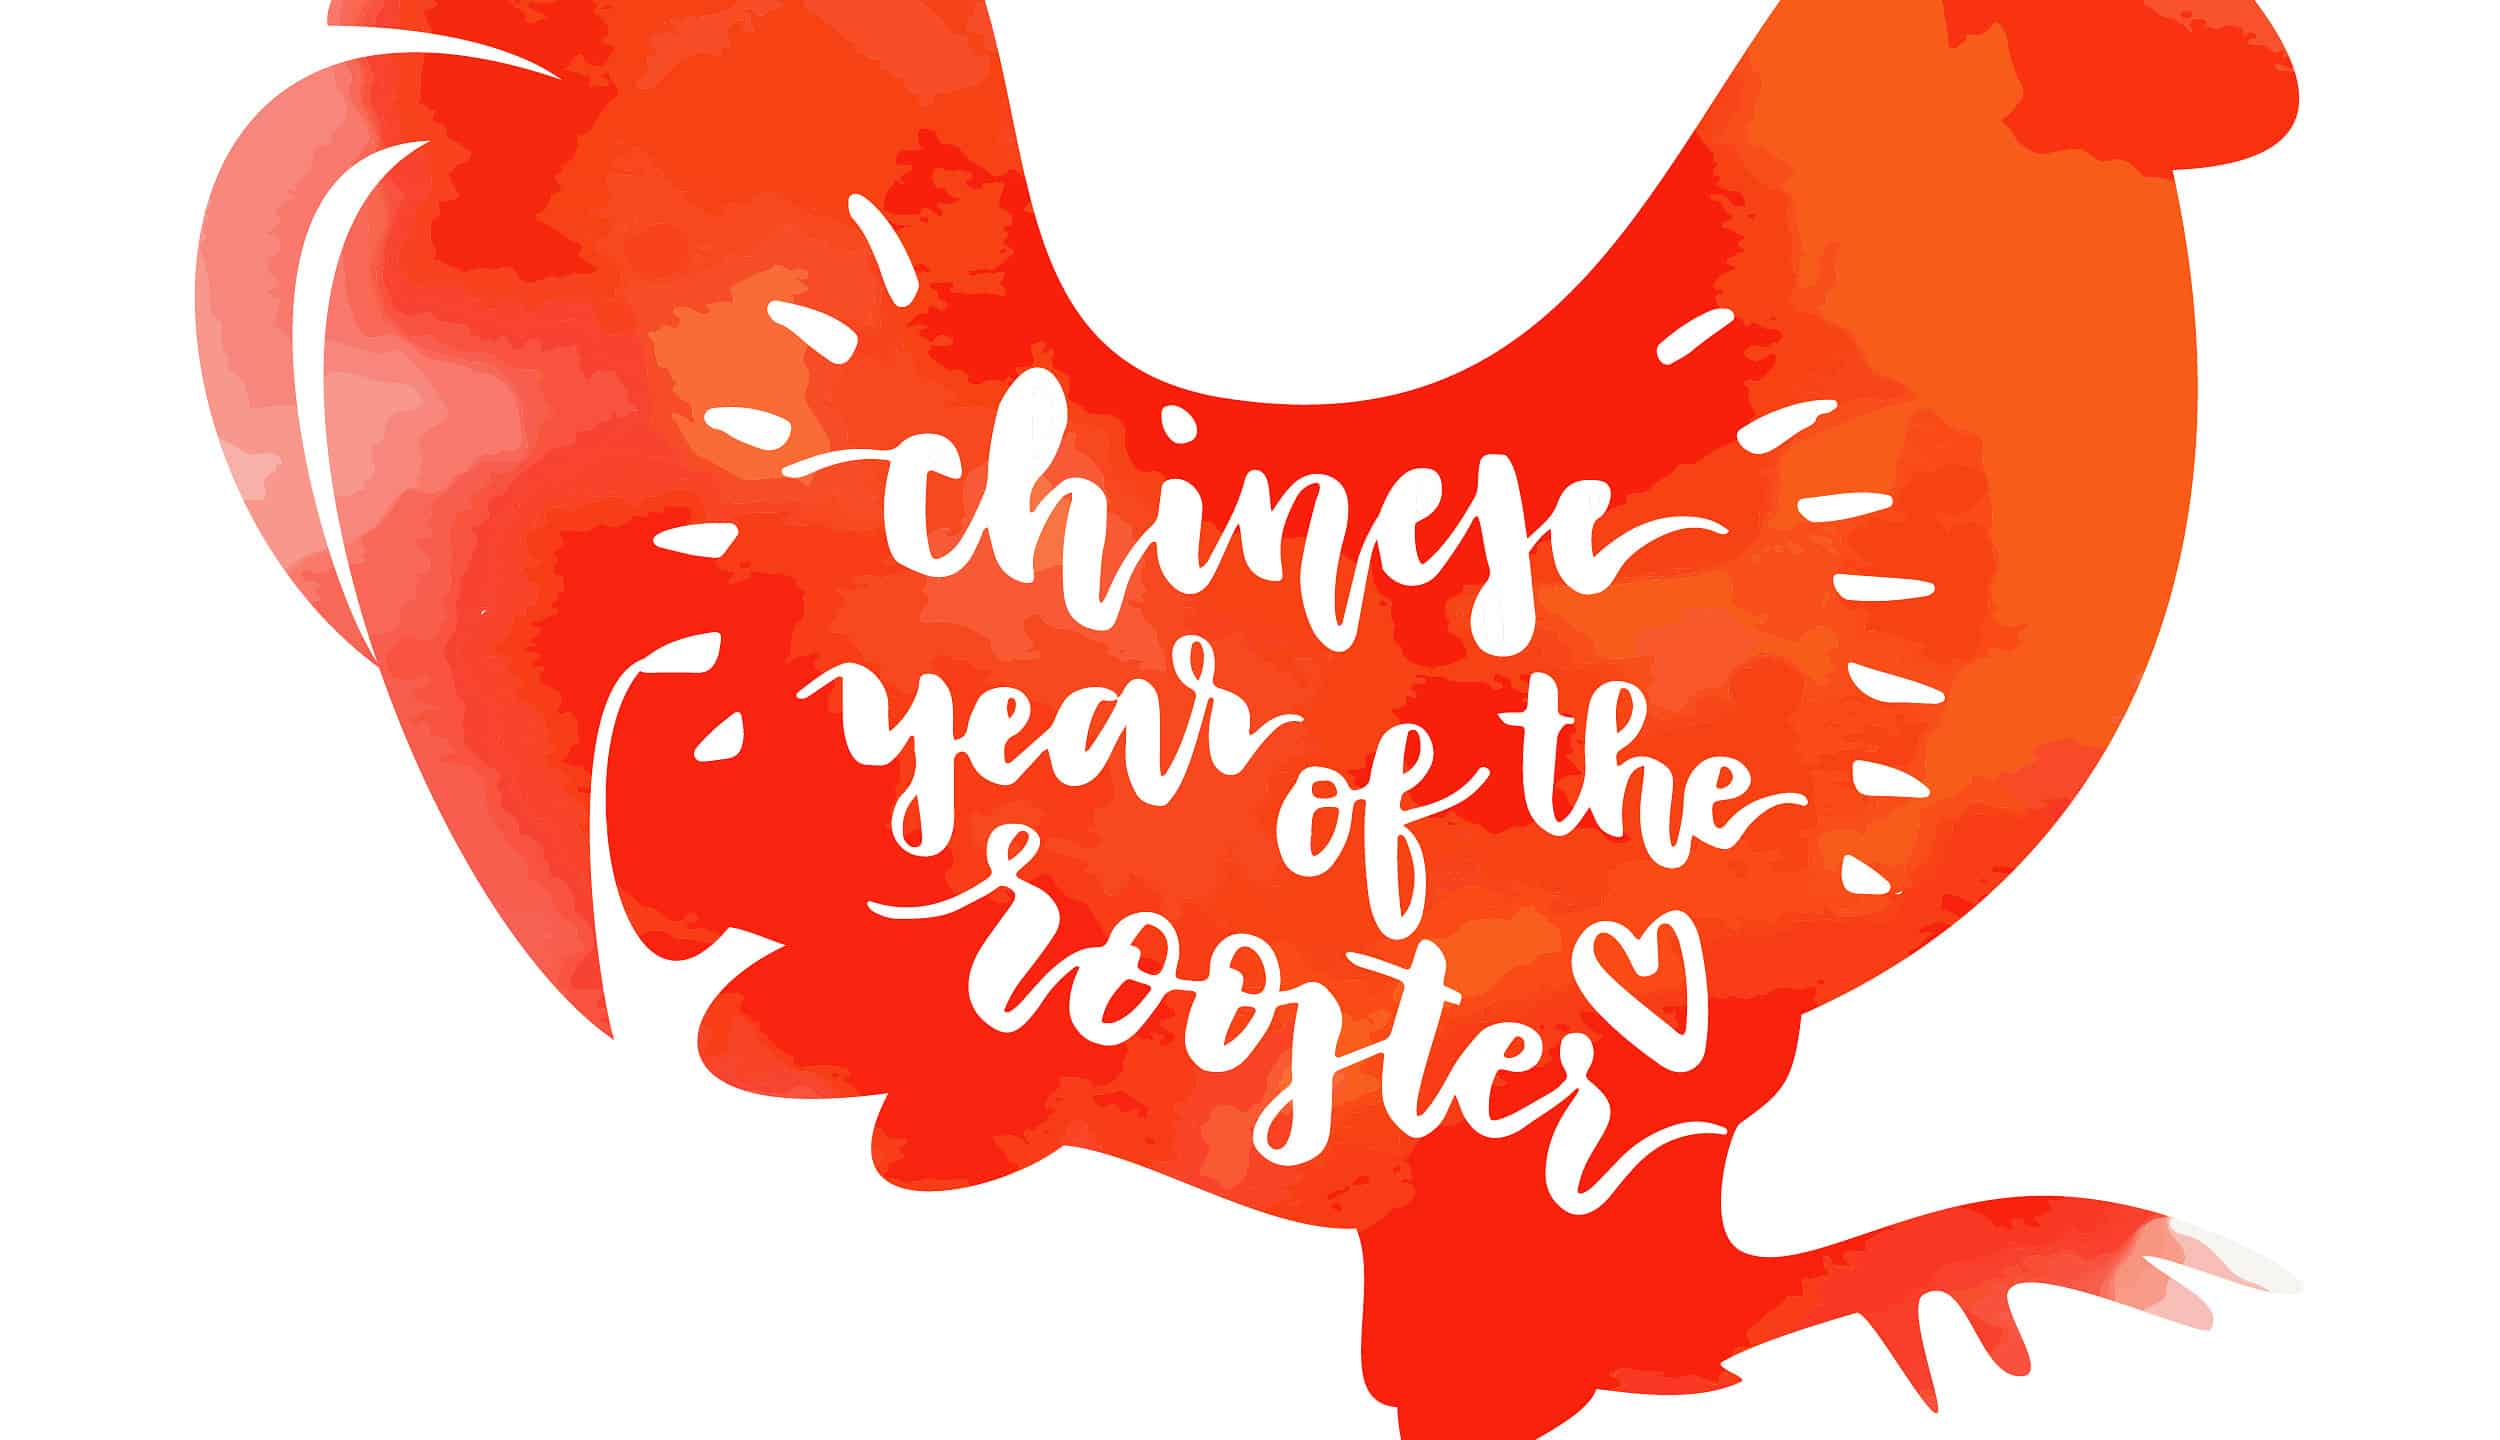 Chinese Year of the Rooster